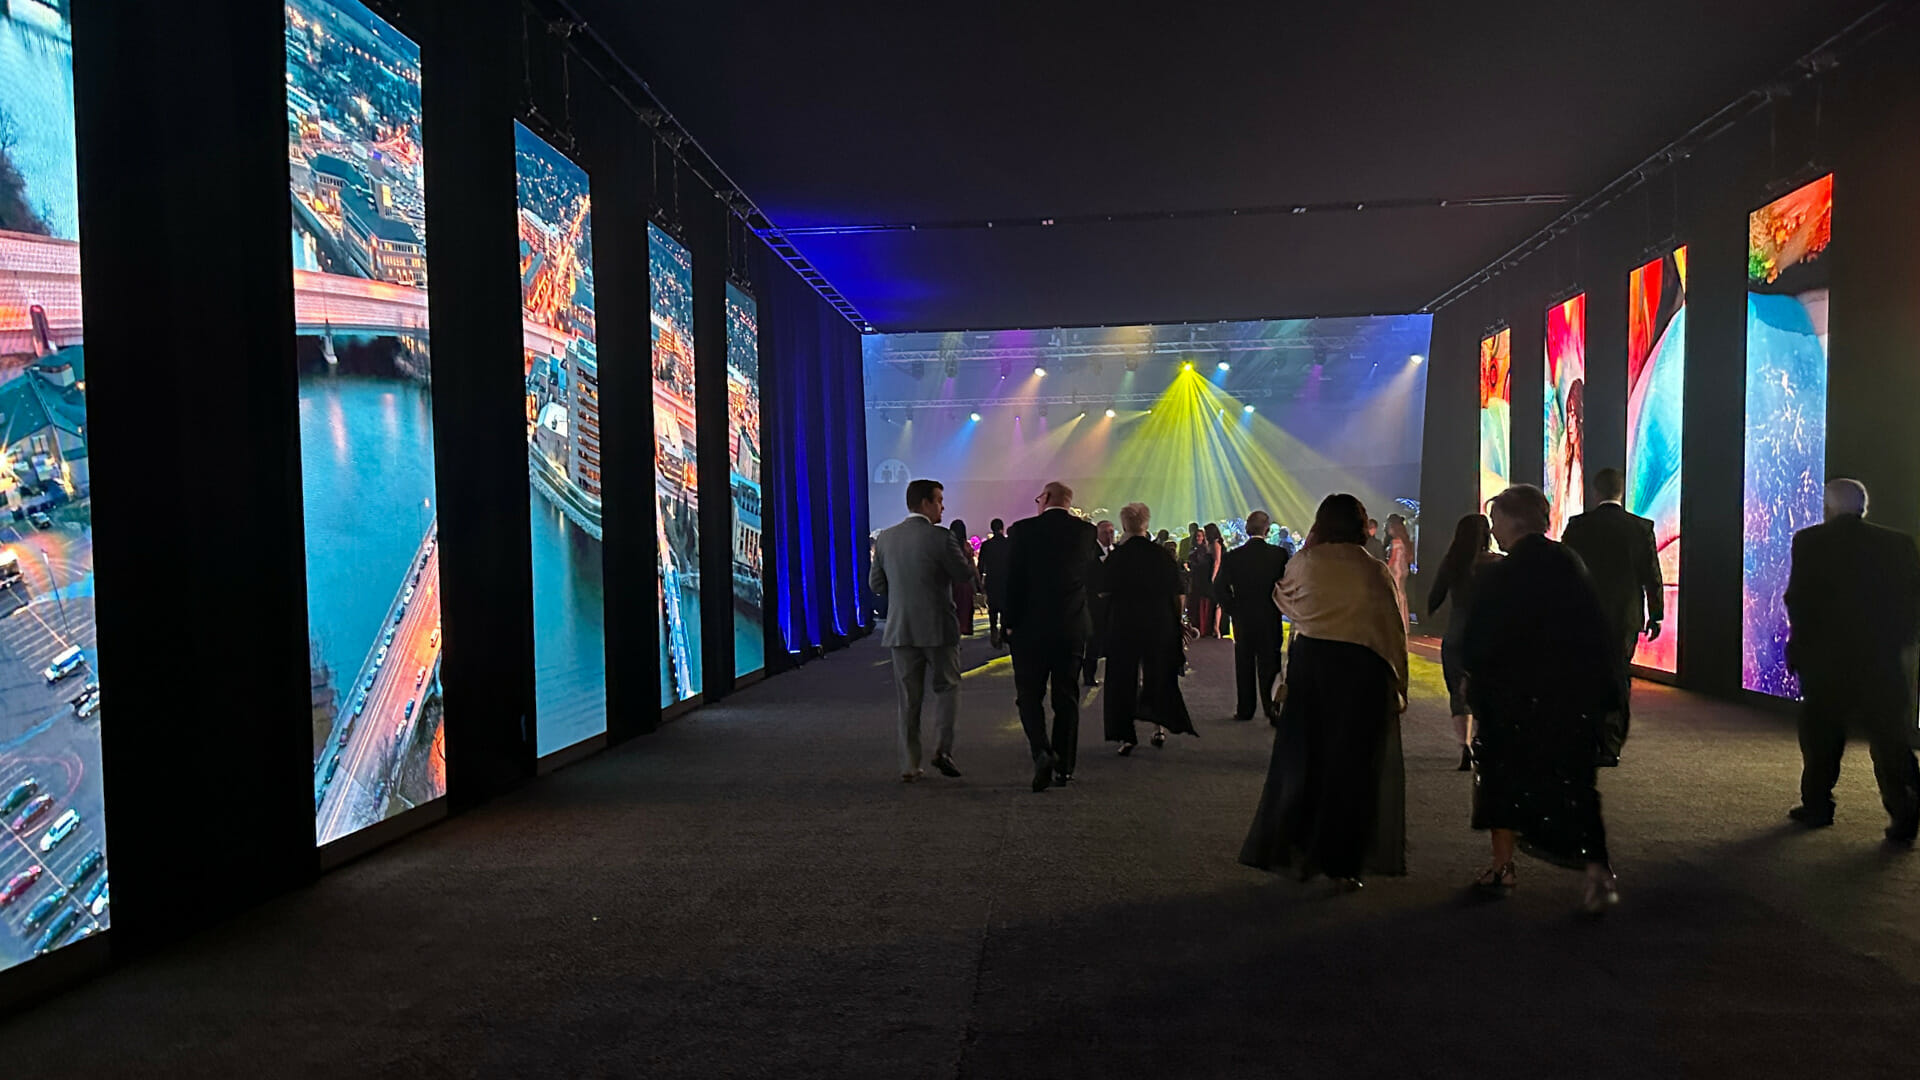 Designing Event Spaces That Captivate Attendees